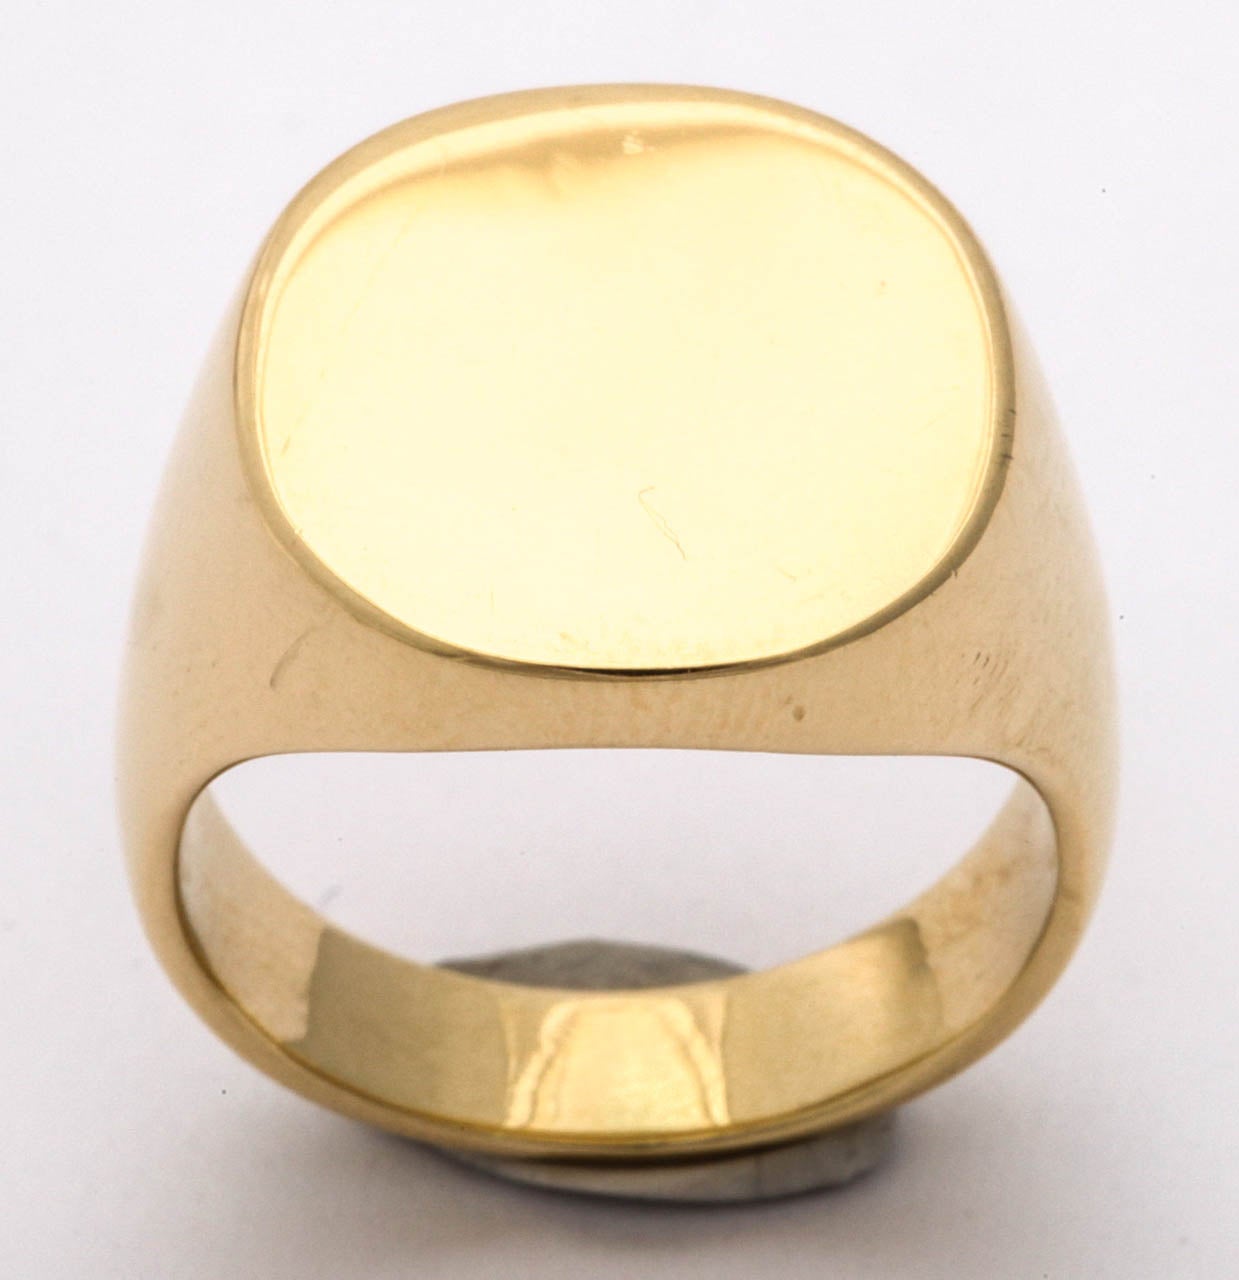 18kt yellow gold Chic Gentlemen's Signet Ring With High Polish Gold Design And Very Solid Weight Signed By TIFFANY&CO.